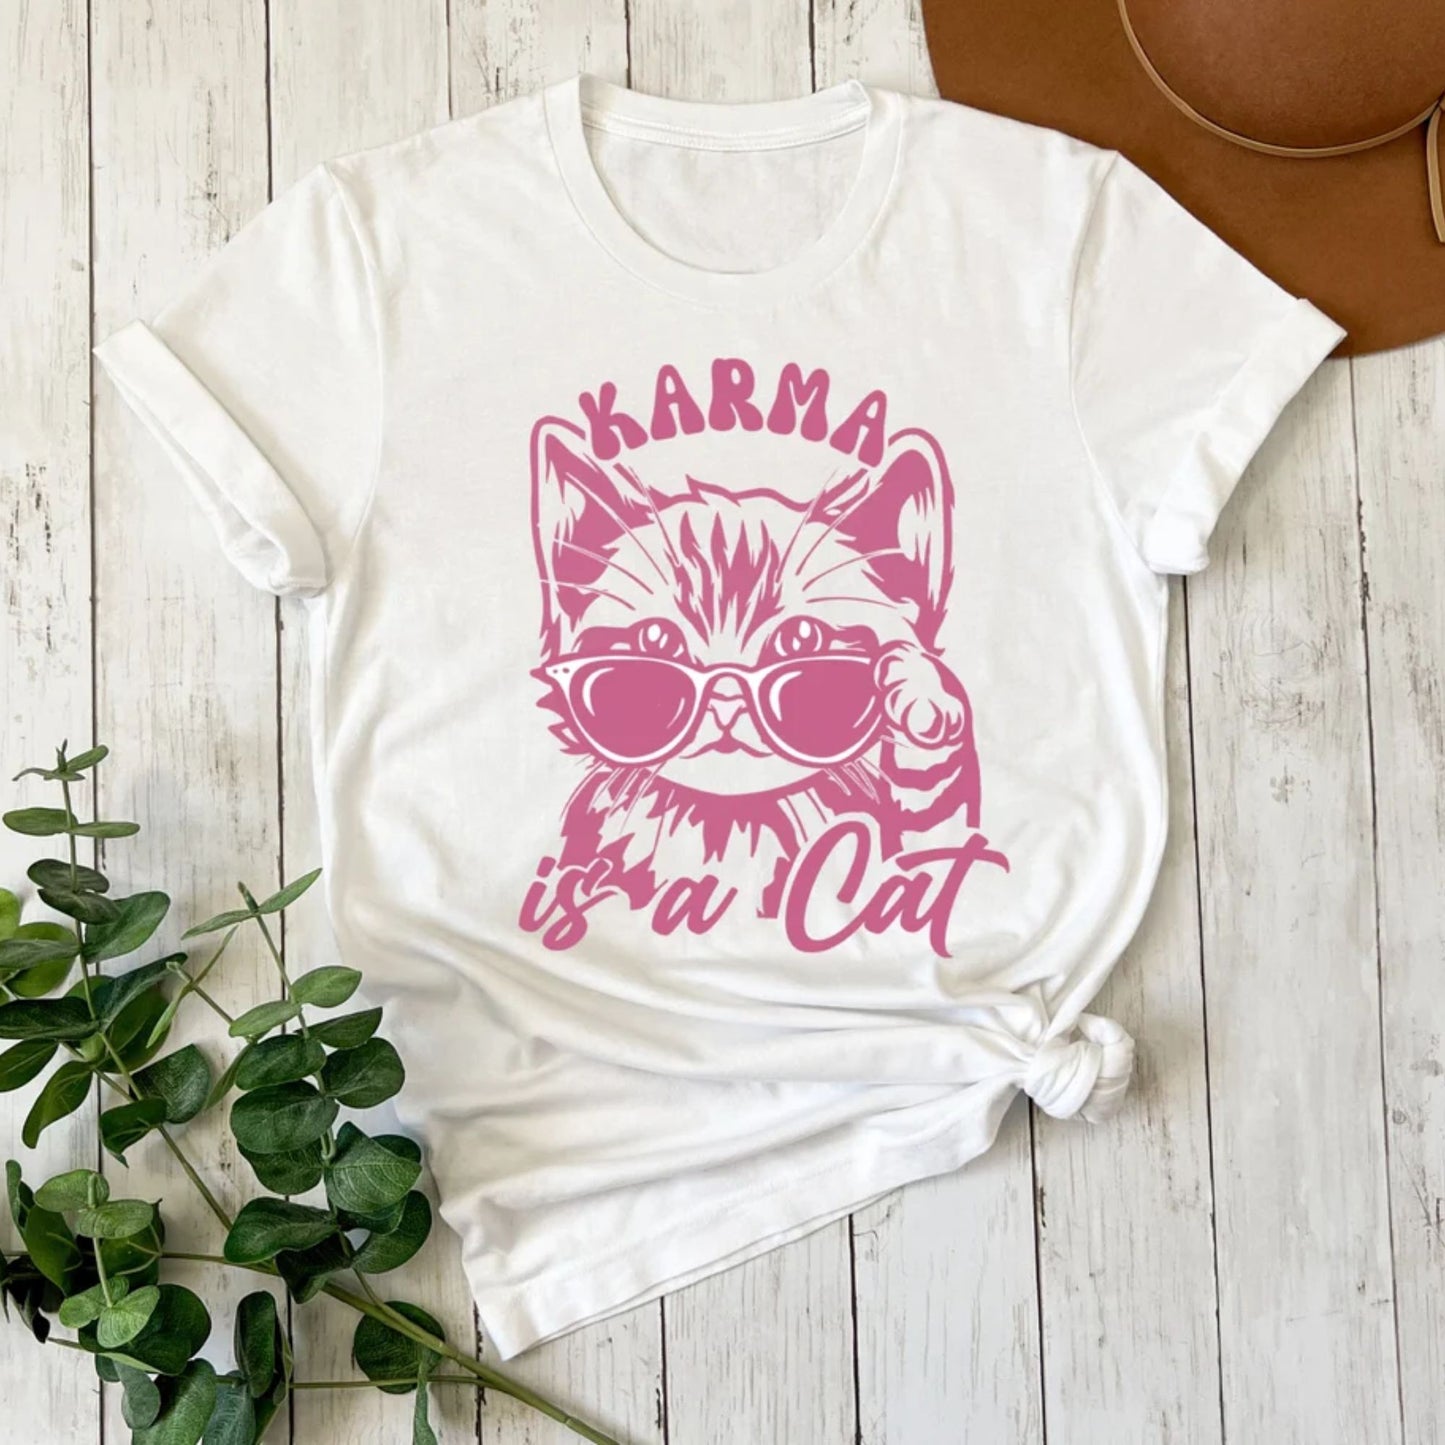 Karma Is a Cat T-Shirt, Cat Lover Gift